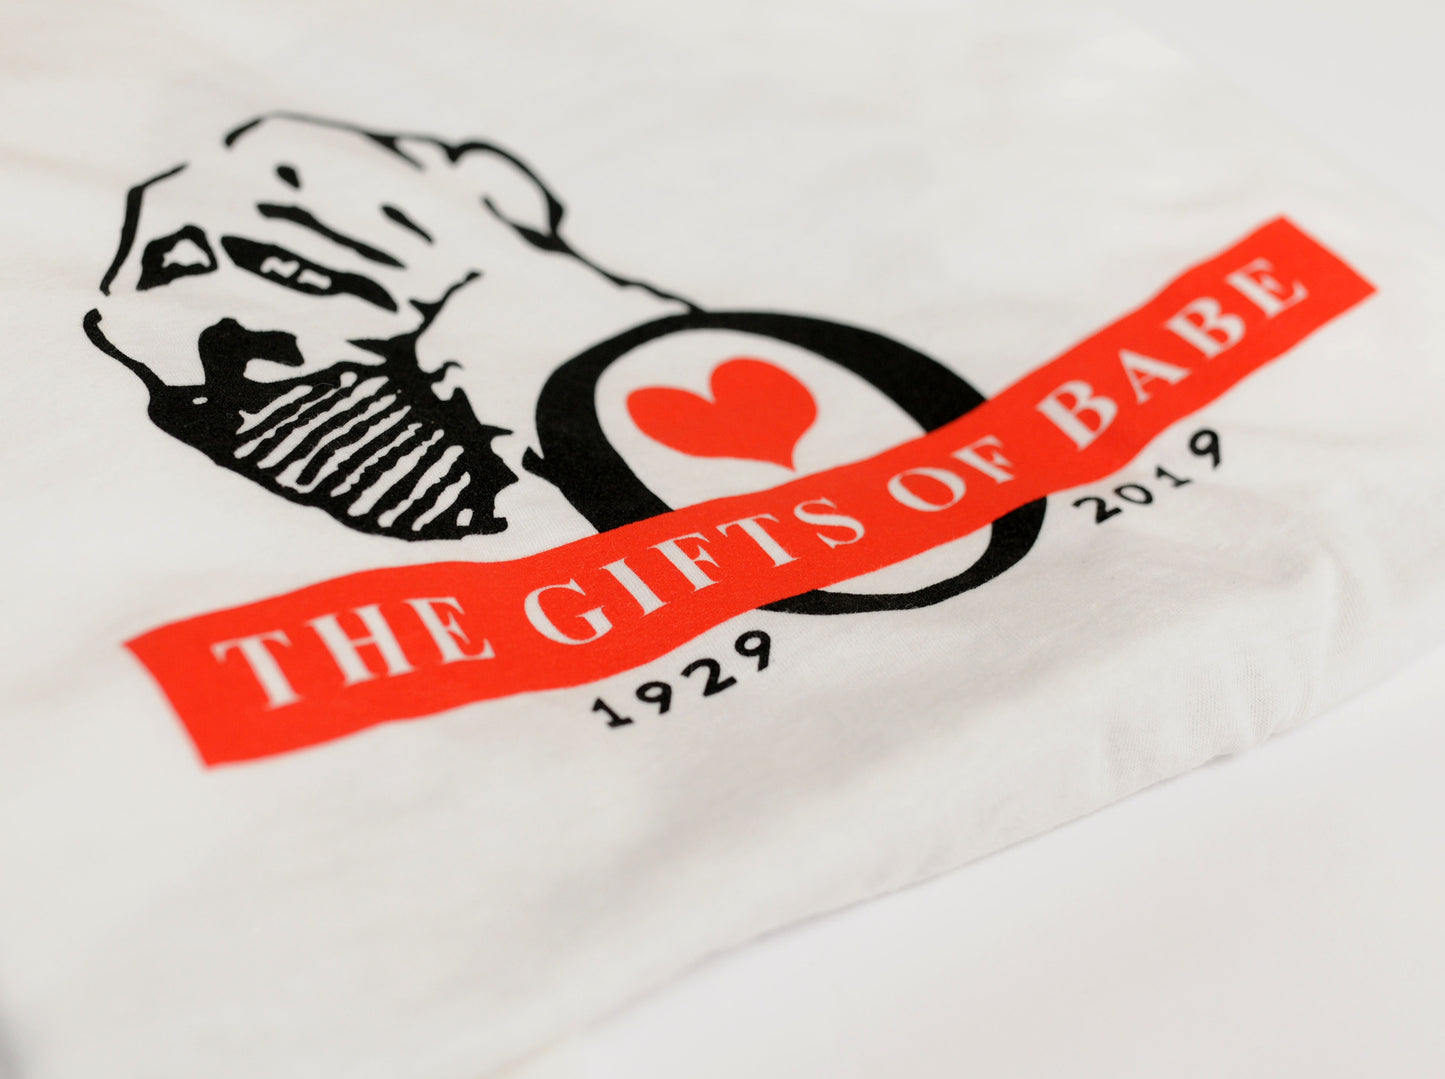 The Gifts of Babe Shirt